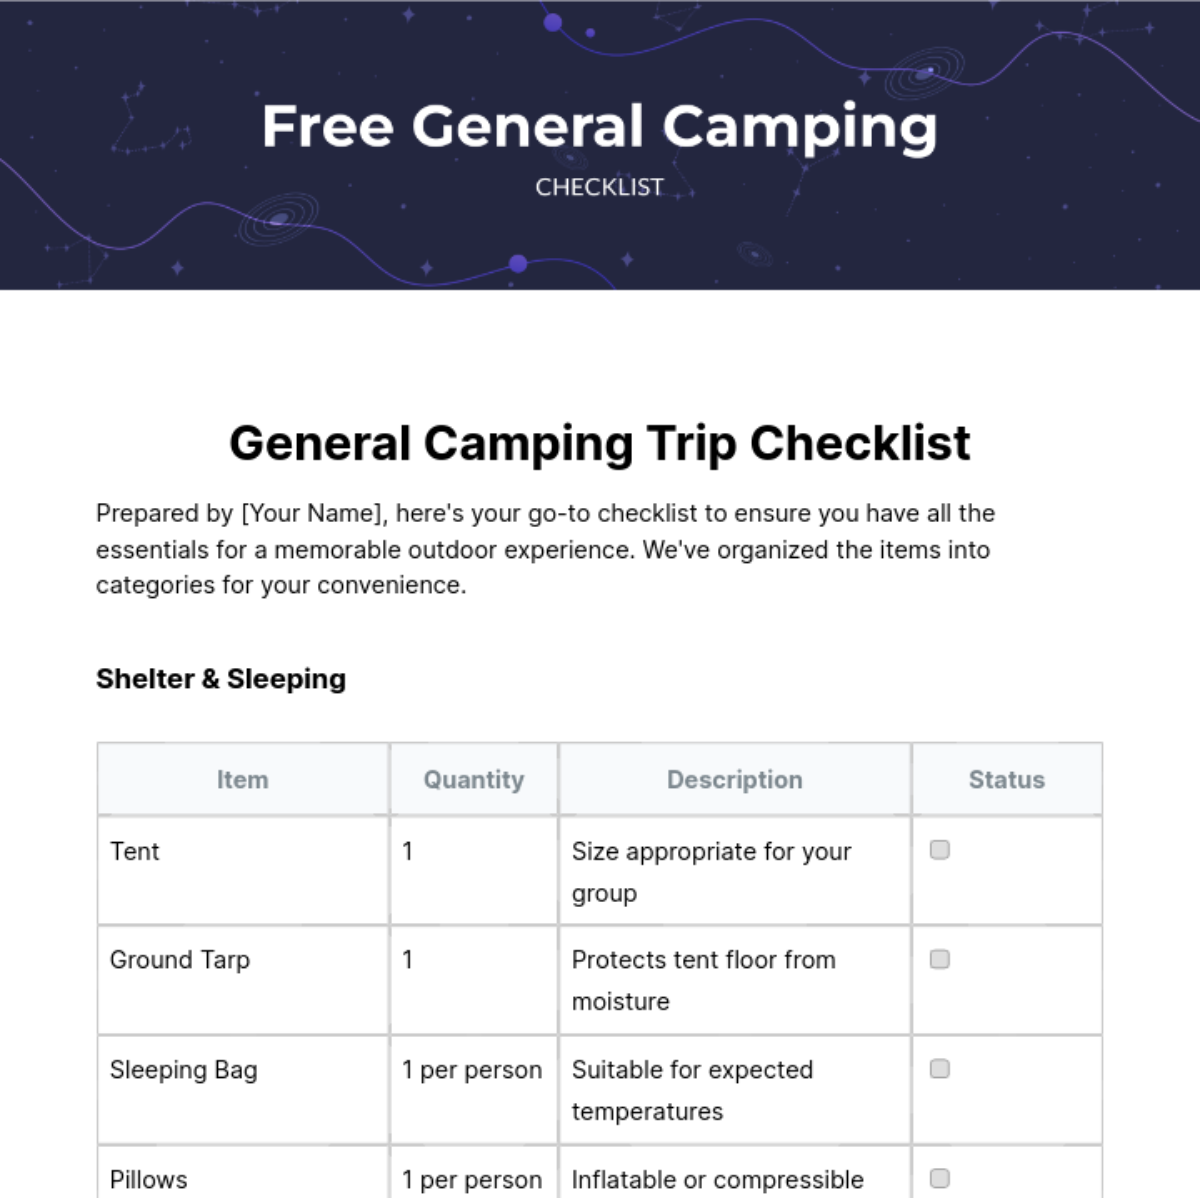 Free General Camping Checklist Template